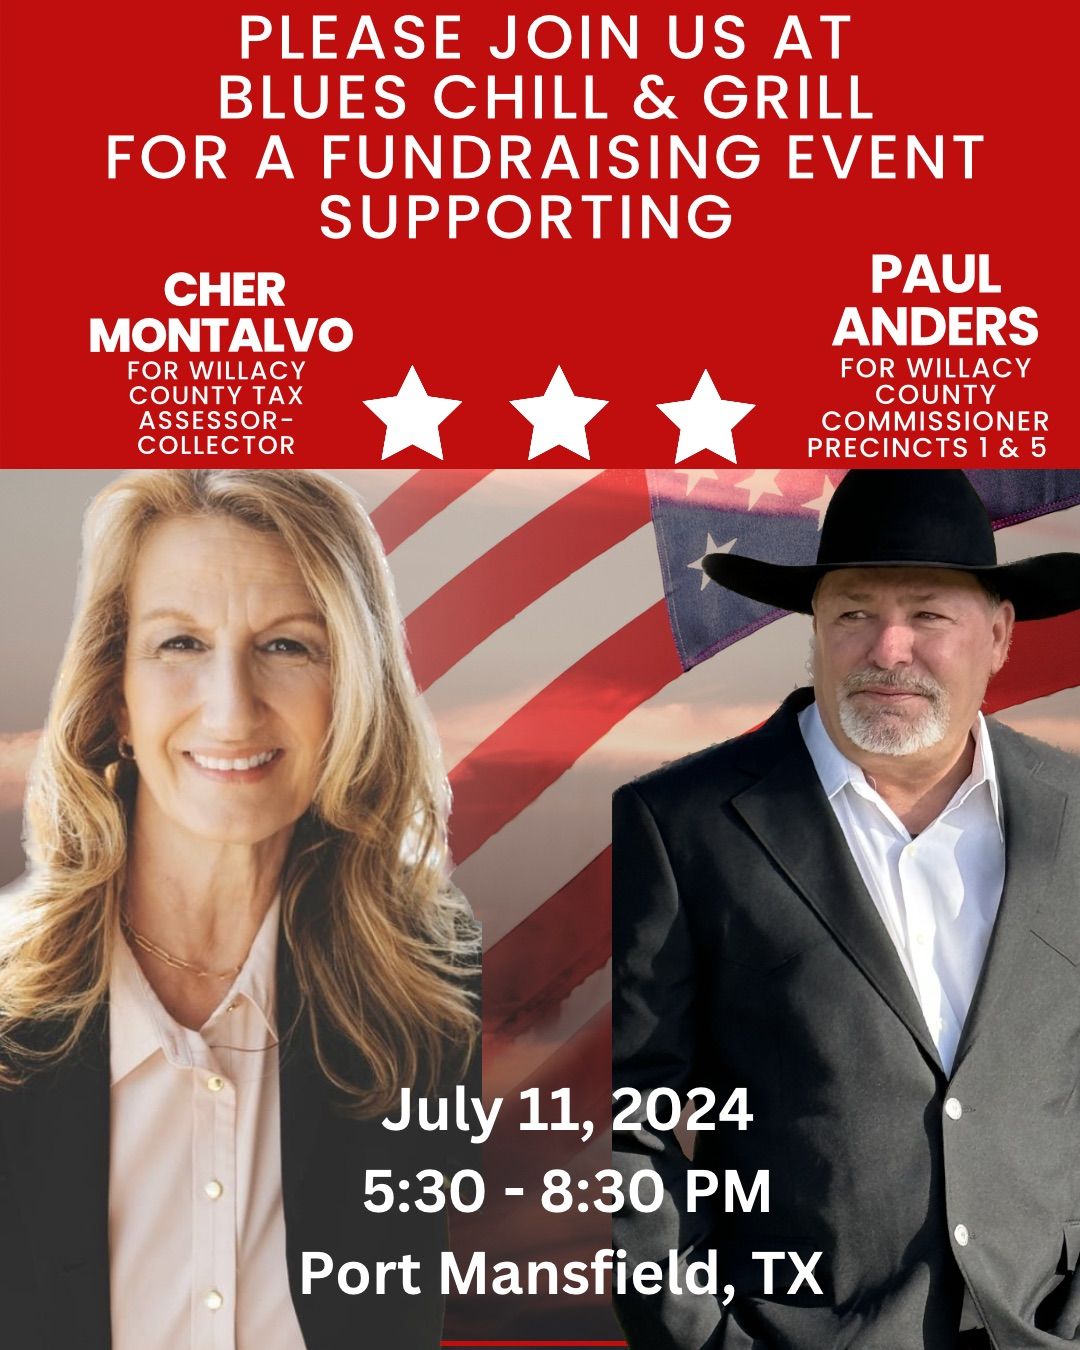 Fundraising Event Supporting Cher Montalvo & Paul Anders 